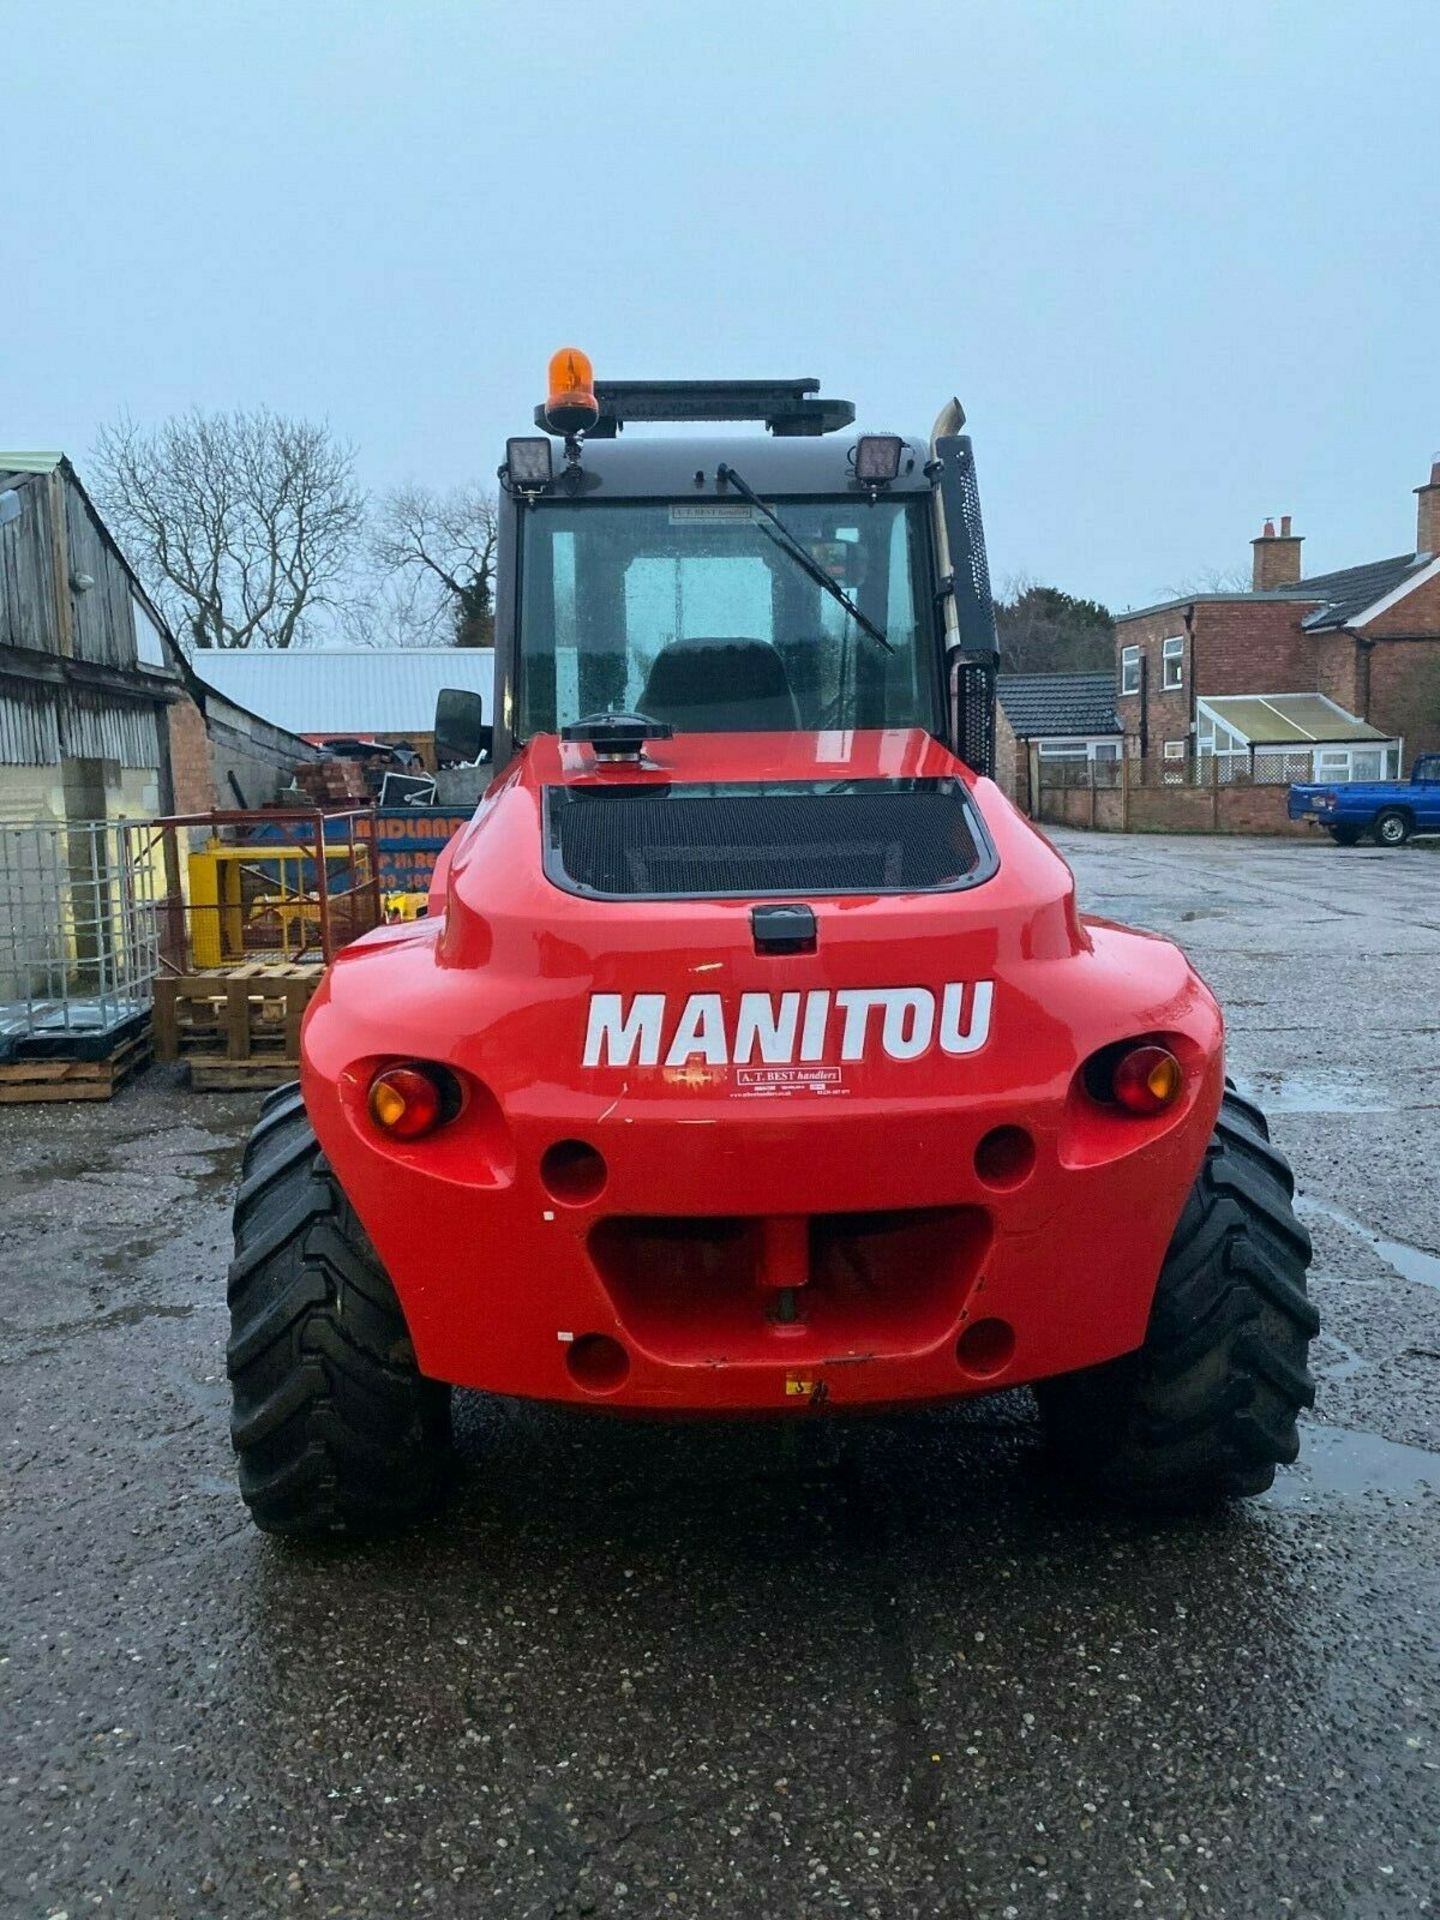 MANITOU 5 TON LIFT FORKLIFT, MODEL: M50-4, ONLY 810 HOURS, WHEEL DRIVE, YEAR 2015 *PLUS VAT* - Image 2 of 8